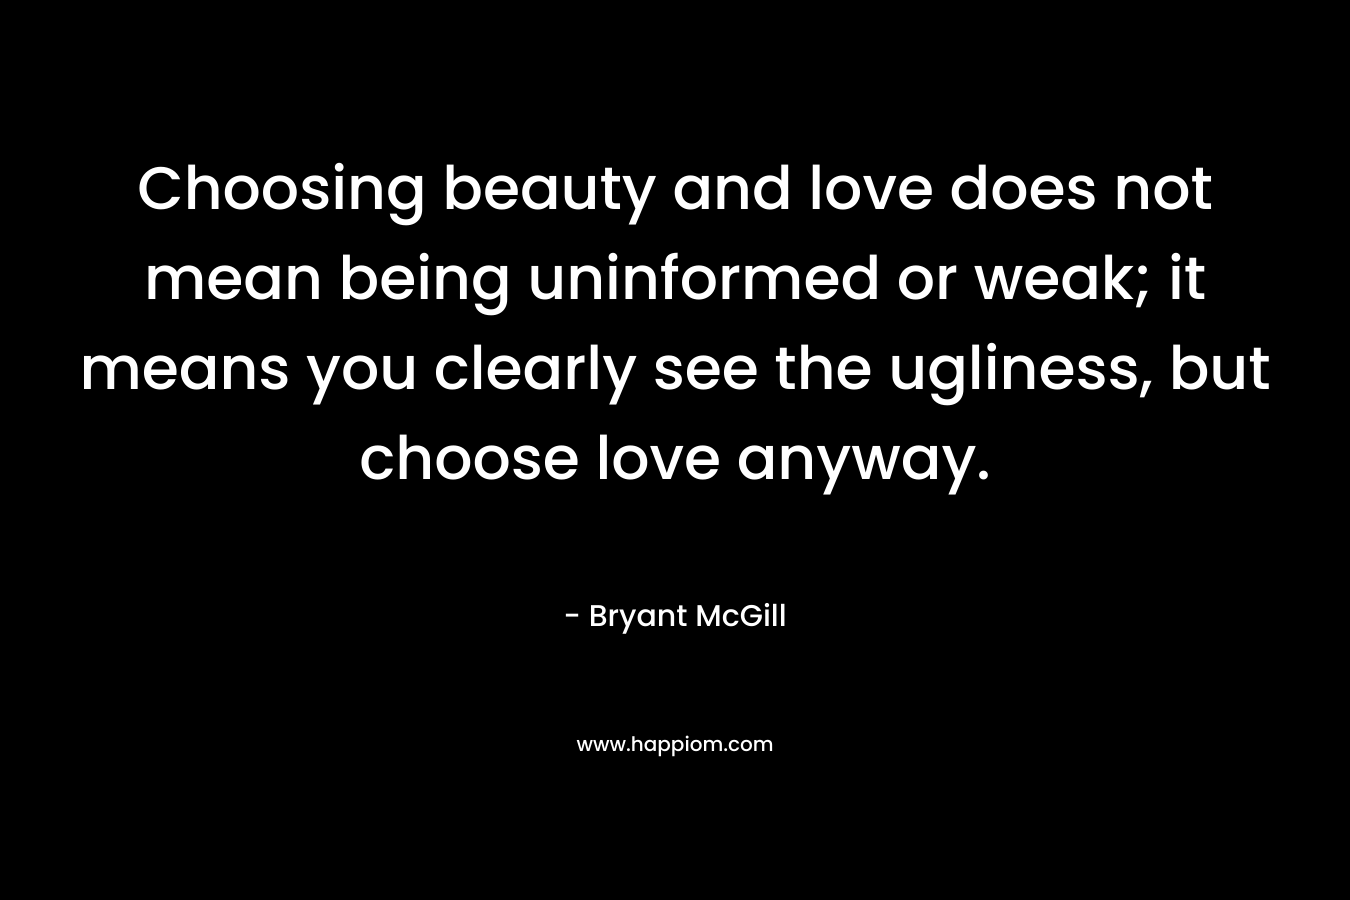 Choosing beauty and love does not mean being uninformed or weak; it means you clearly see the ugliness, but choose love anyway.